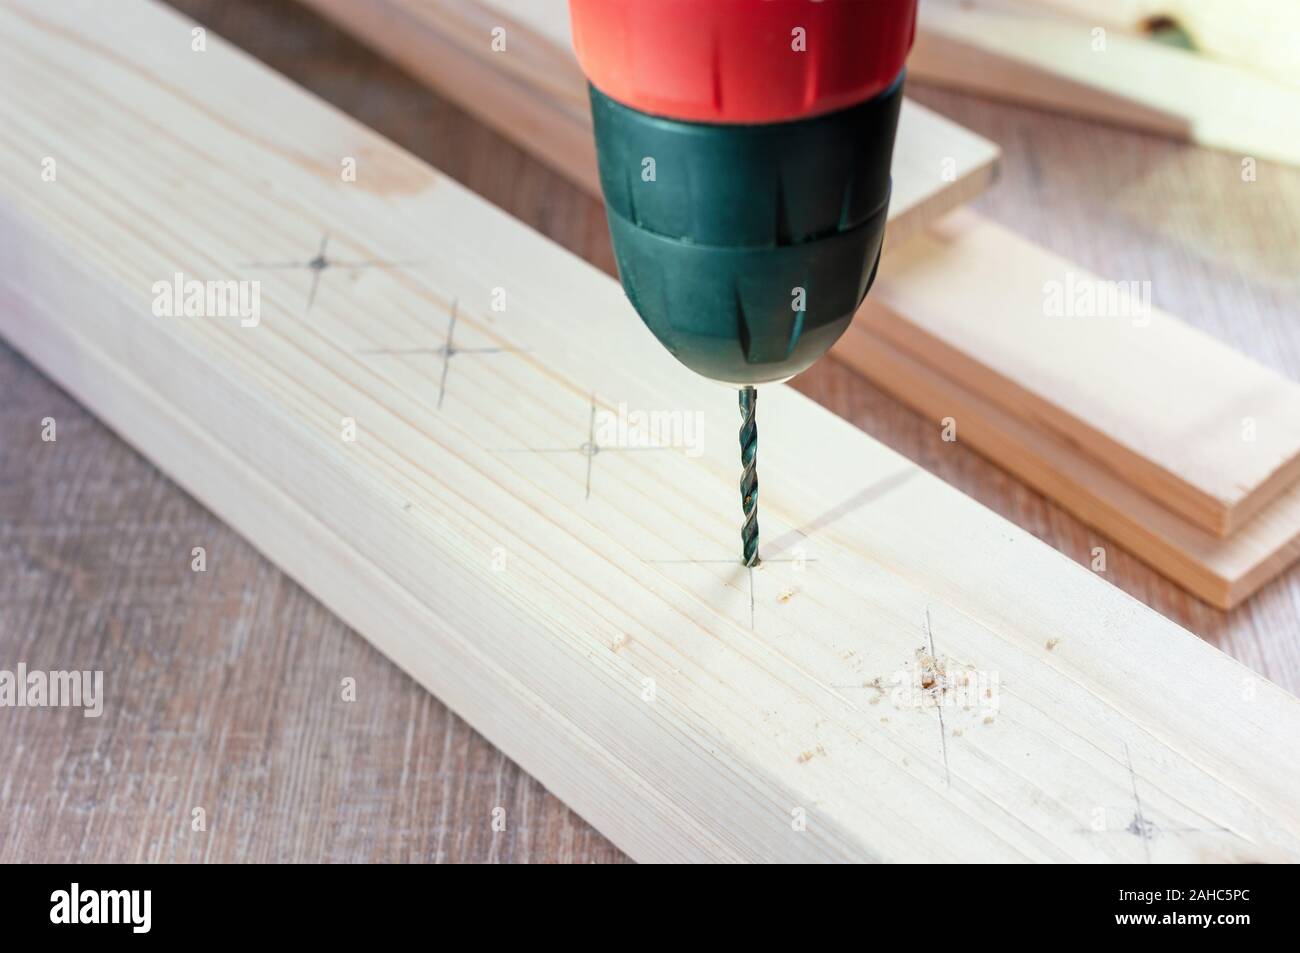 Making hole into the wood with drill bit Stock Photo